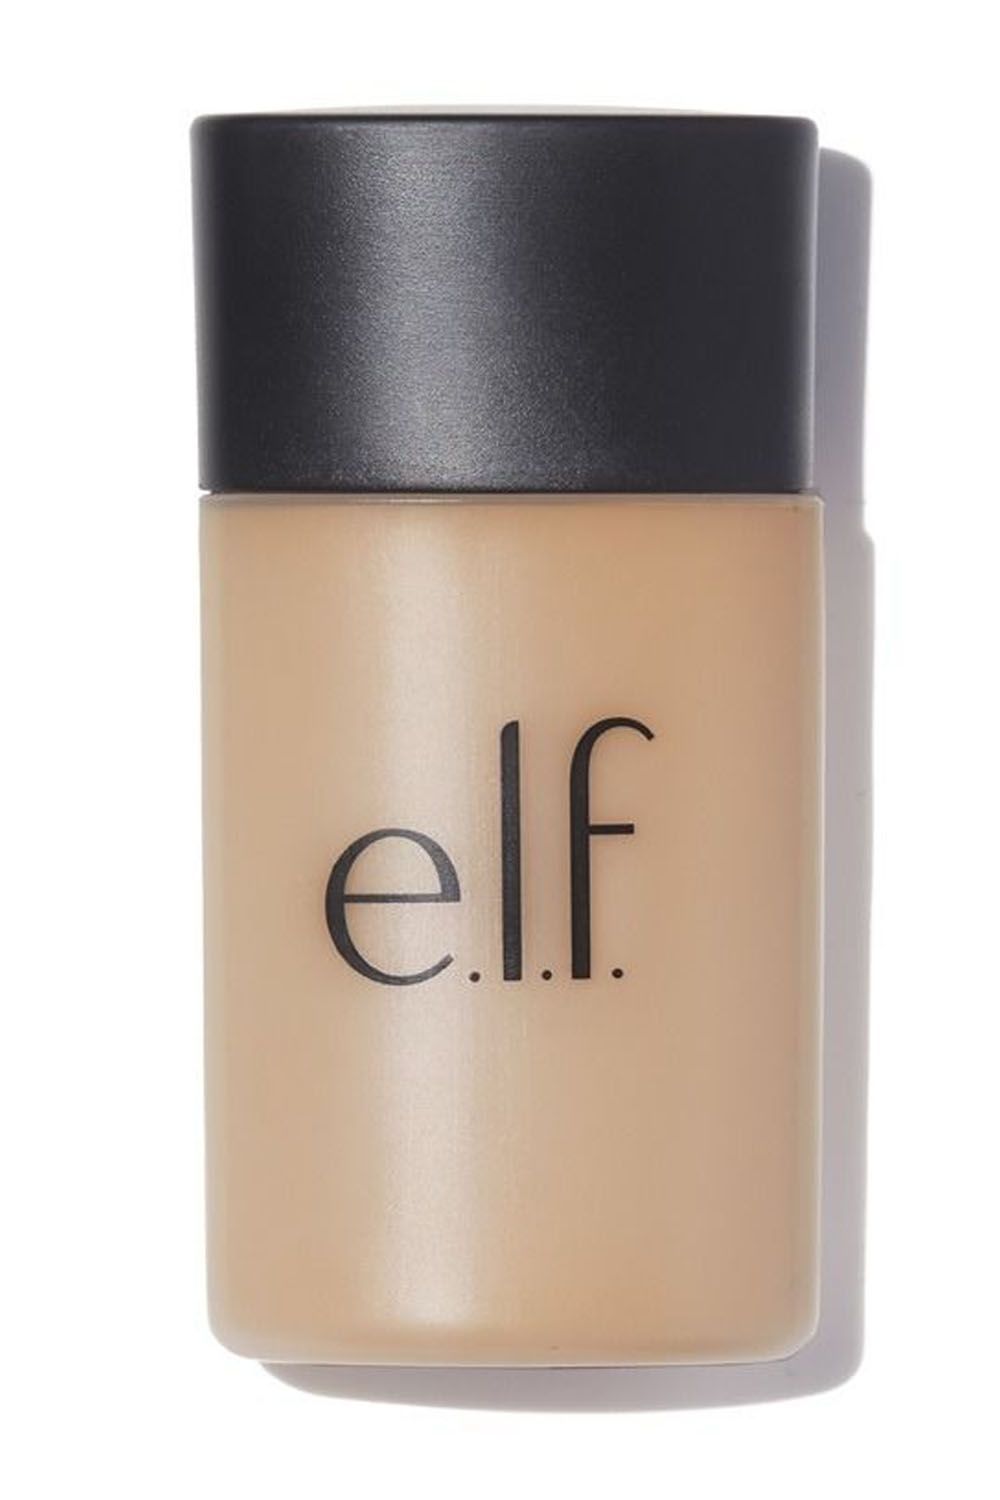 15 Best Foundations for Acne-Prone Skin